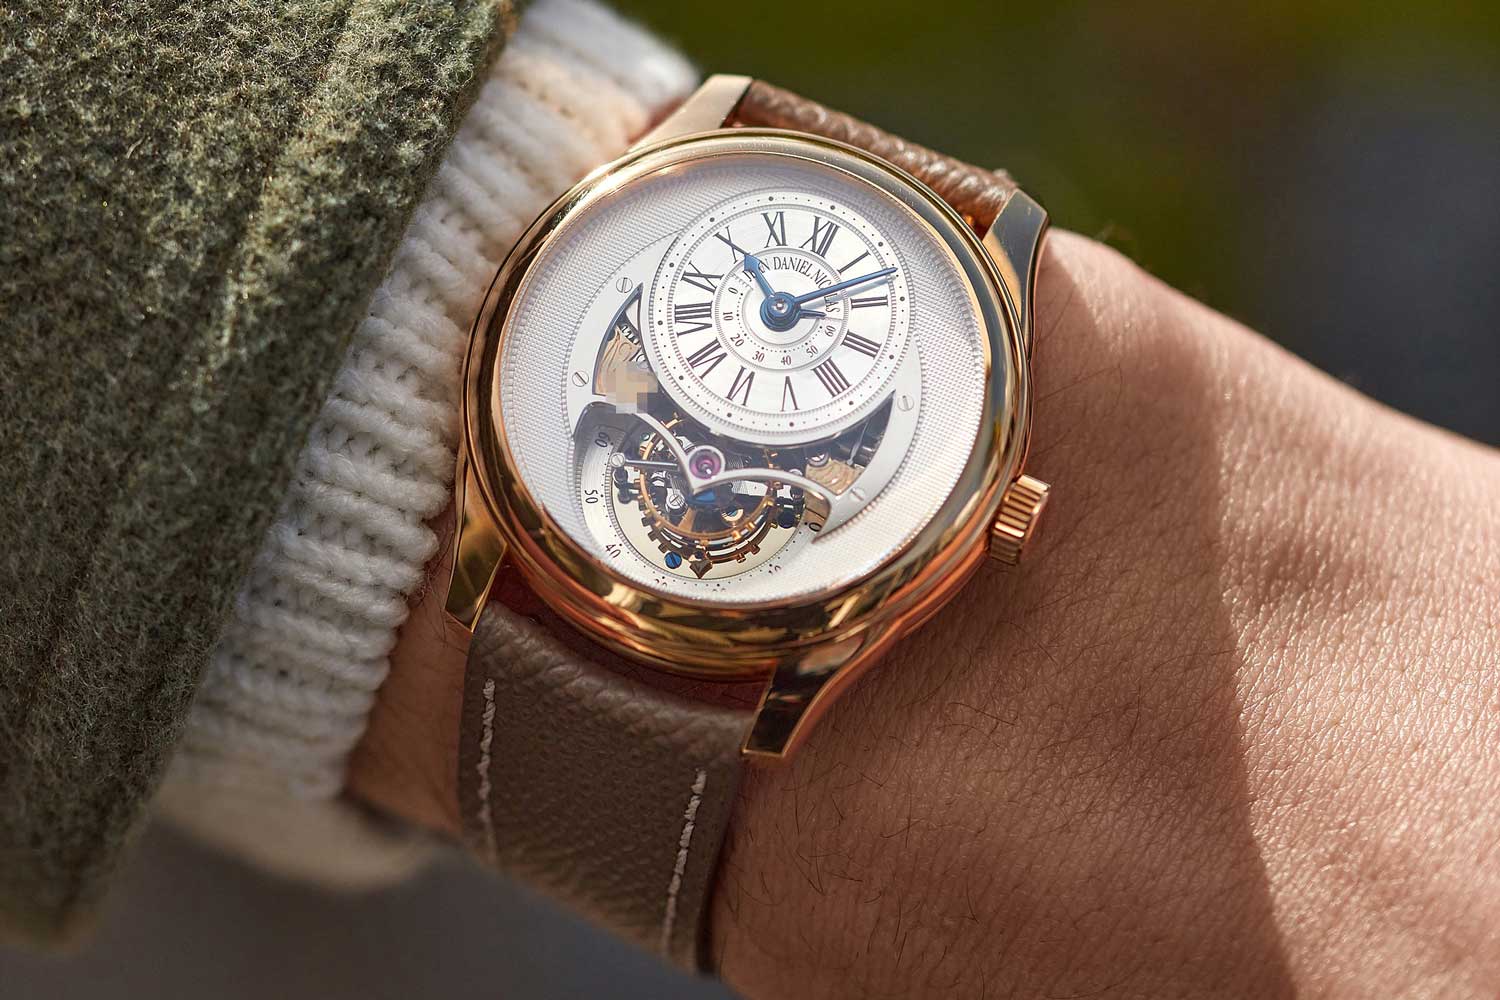 The Jean Daniel Nicolas Tourbillon 2 Minutes, handmade and finished by Roth (Image: A Collected Man)